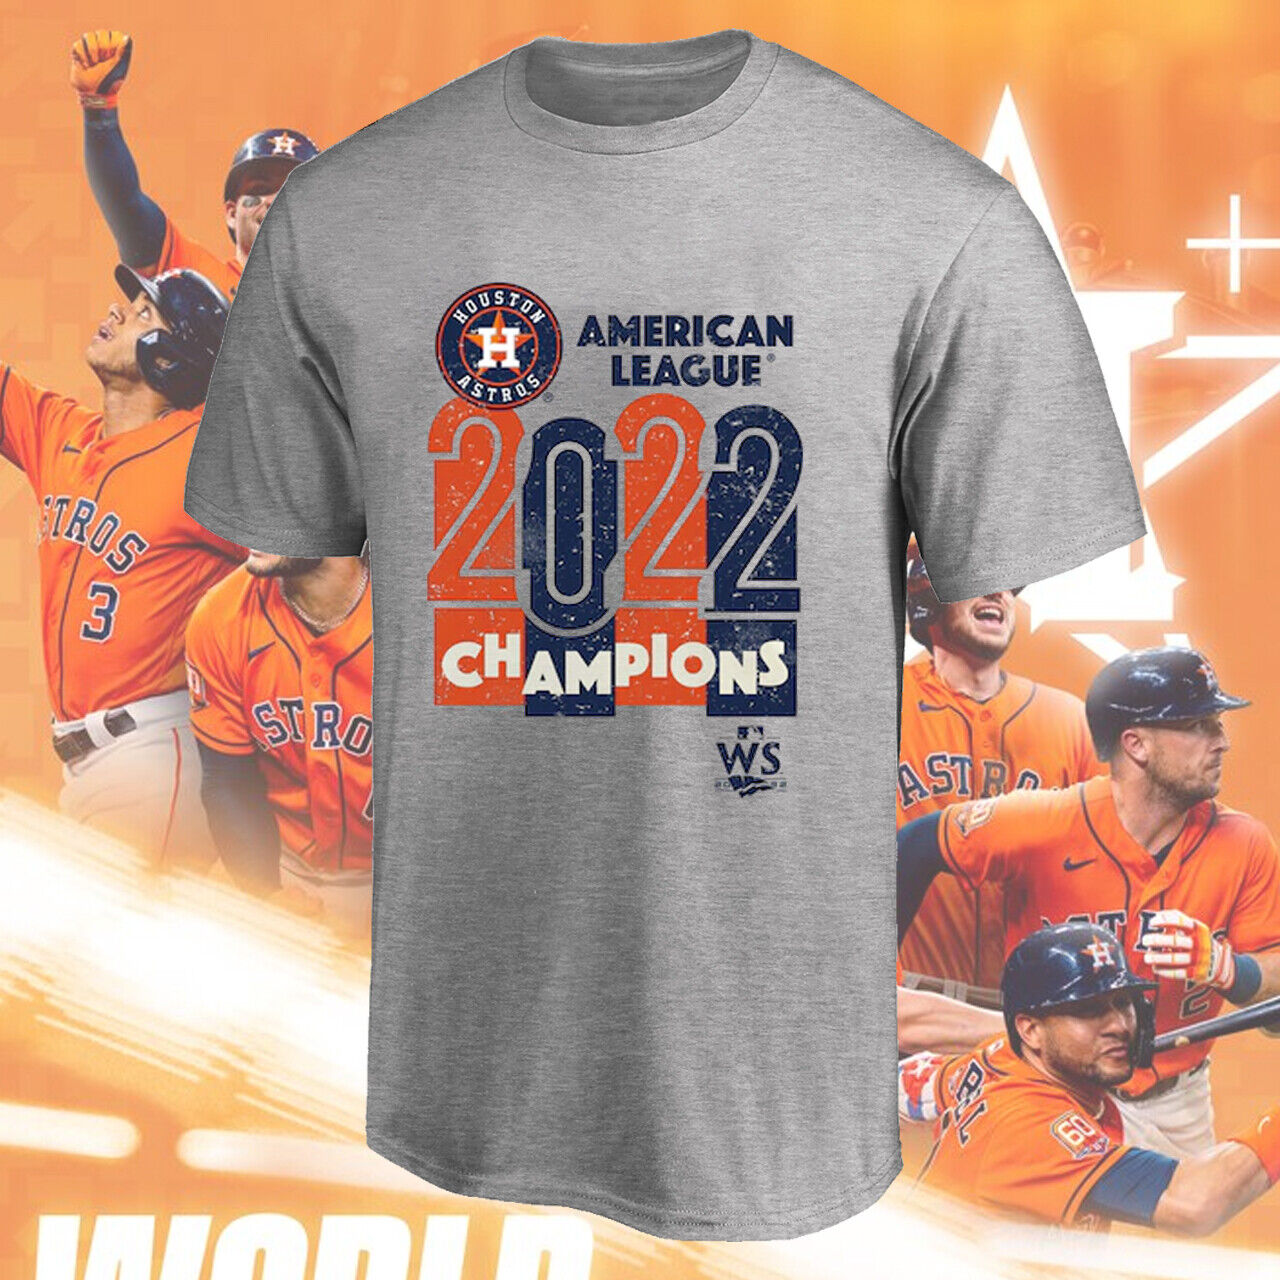 Hot Houston Astros Baseball Team Finals Champs 2022 T-shirt S-5xl Gift Fan Full Size Up To 5xl